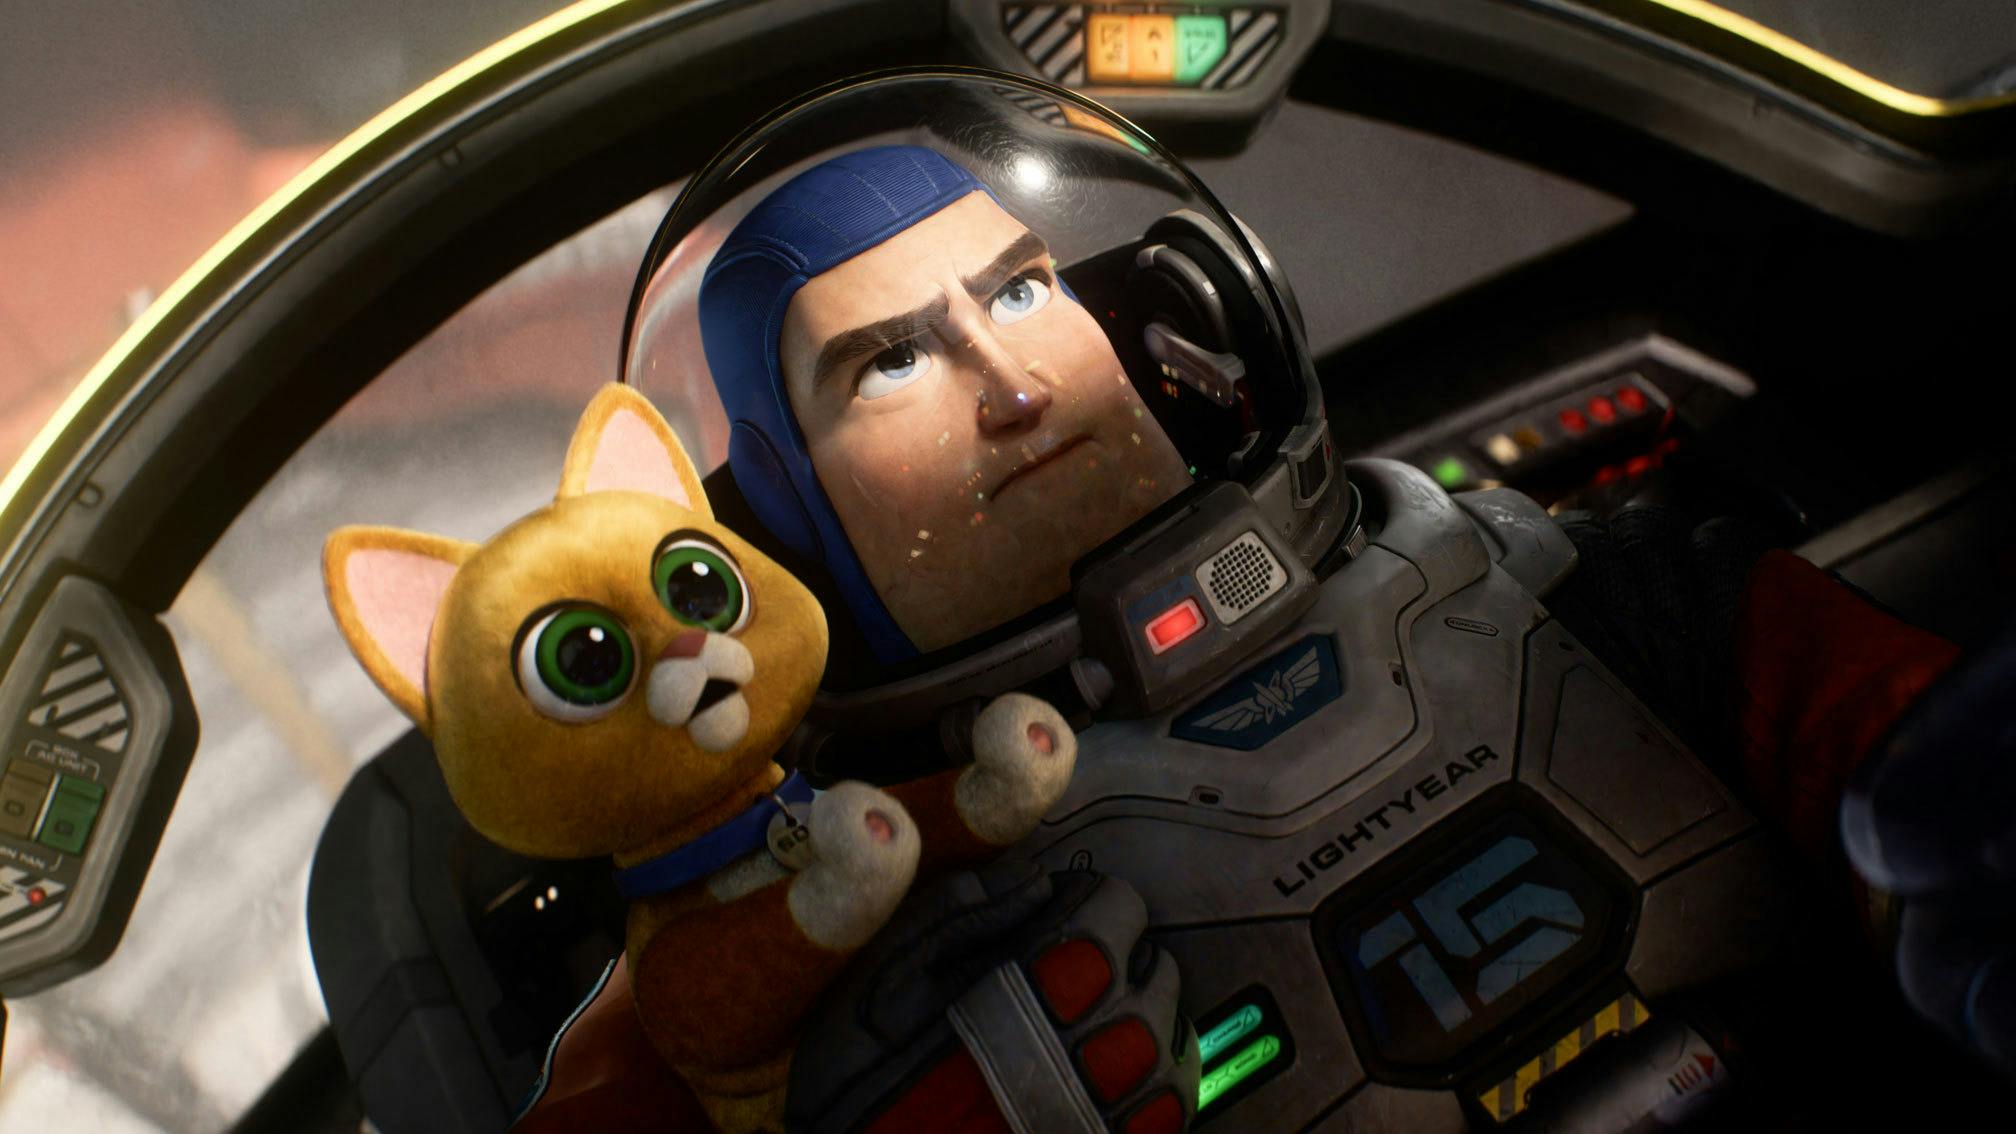 Watch the new trailer for Lightyear, featuring Chris Evans, Taika Waititi and more